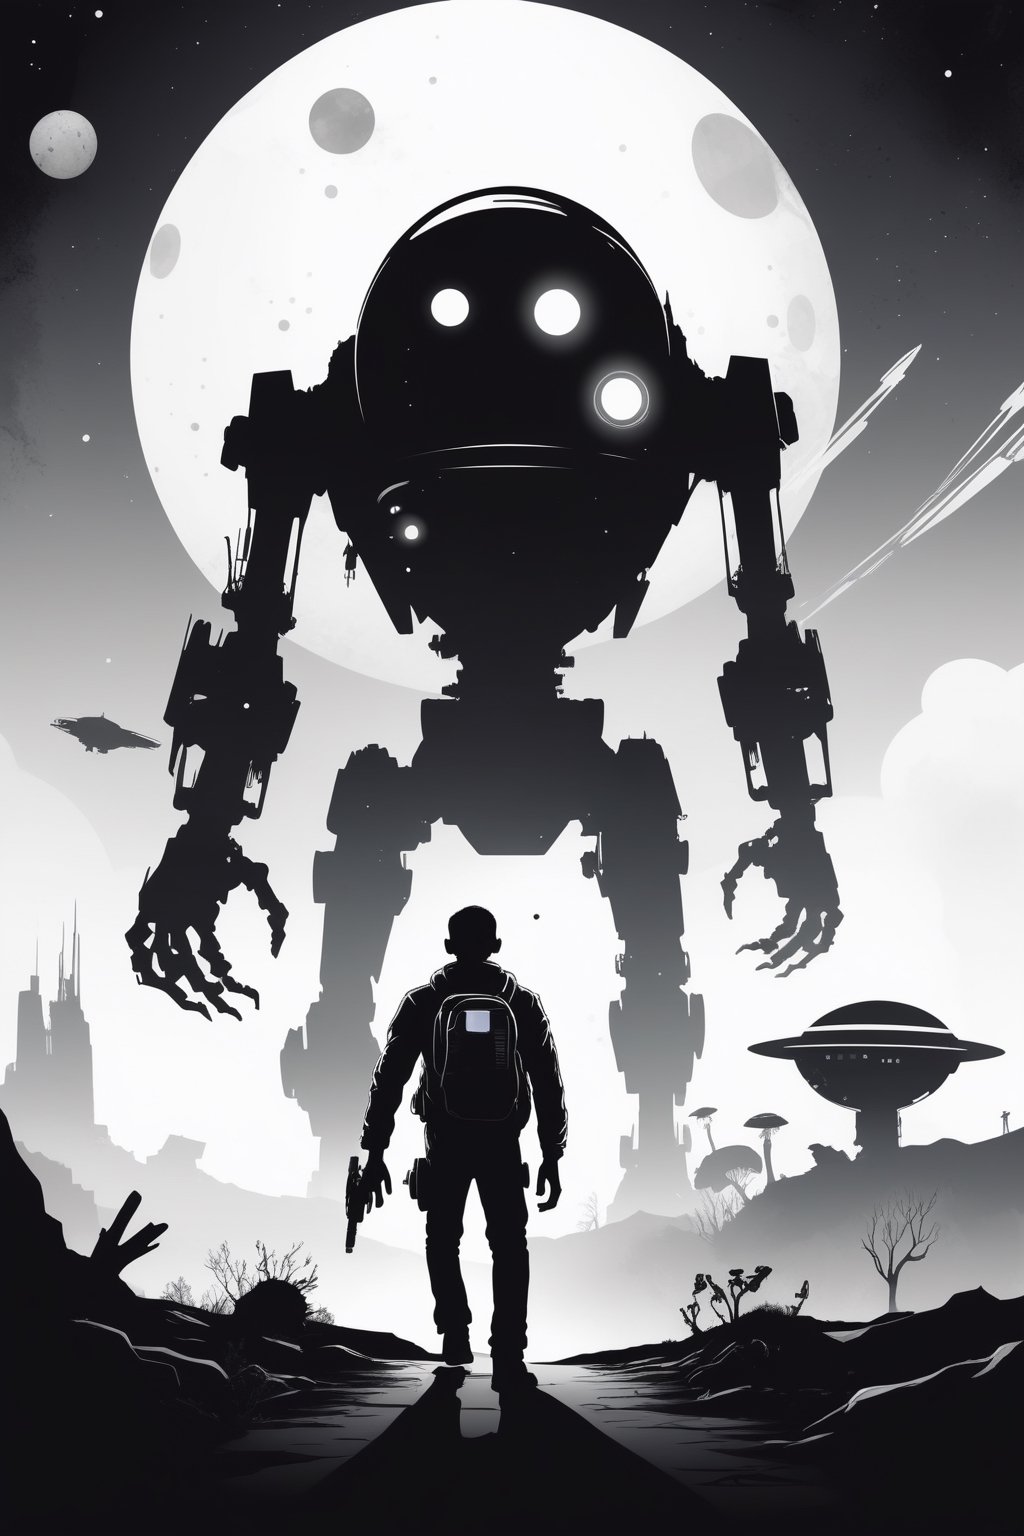 A stylish vector poster in the Noir Silhouette art style, black and white color palette with watercolor wash effects. Featuring a humorous cartoon zombie cyborg walking confidently towards a spaceship. In the background, a far-off sci-fi planet teeming with the home of diverse creatures.